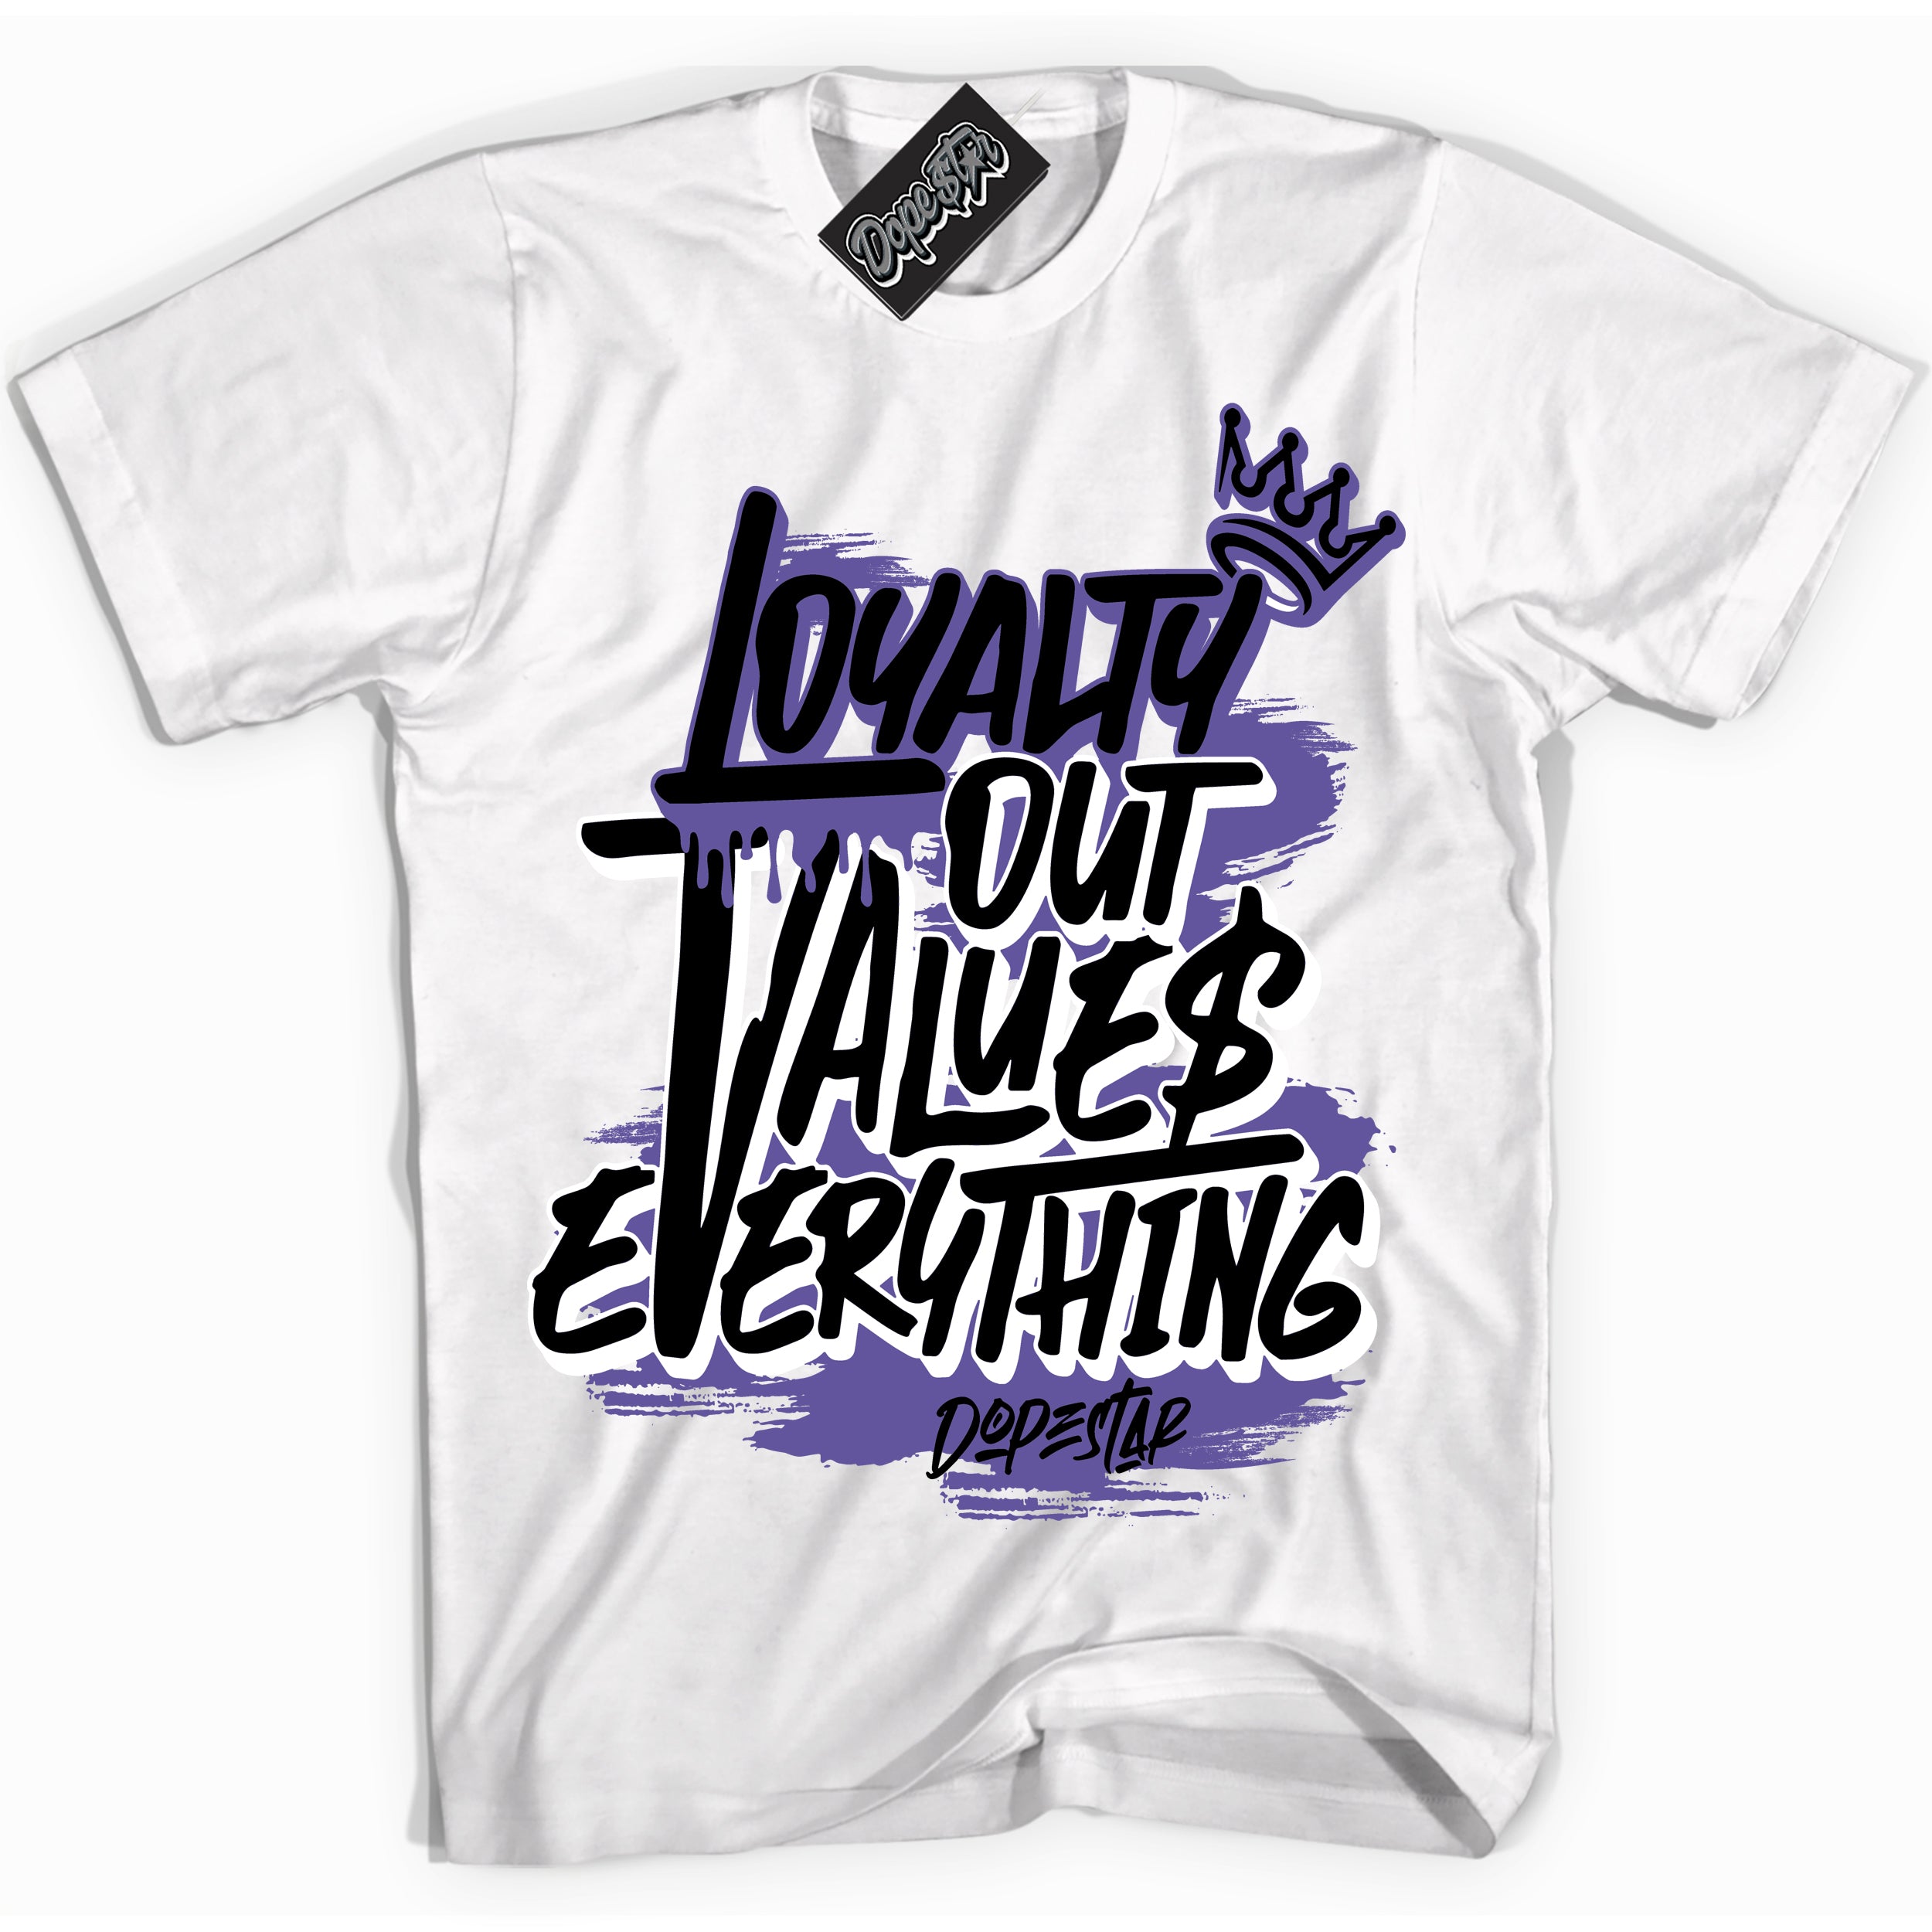 Cool White Shirt with “ Loyalty Out Values Everything” design that perfectly matches Psychic Purple Sneakers.